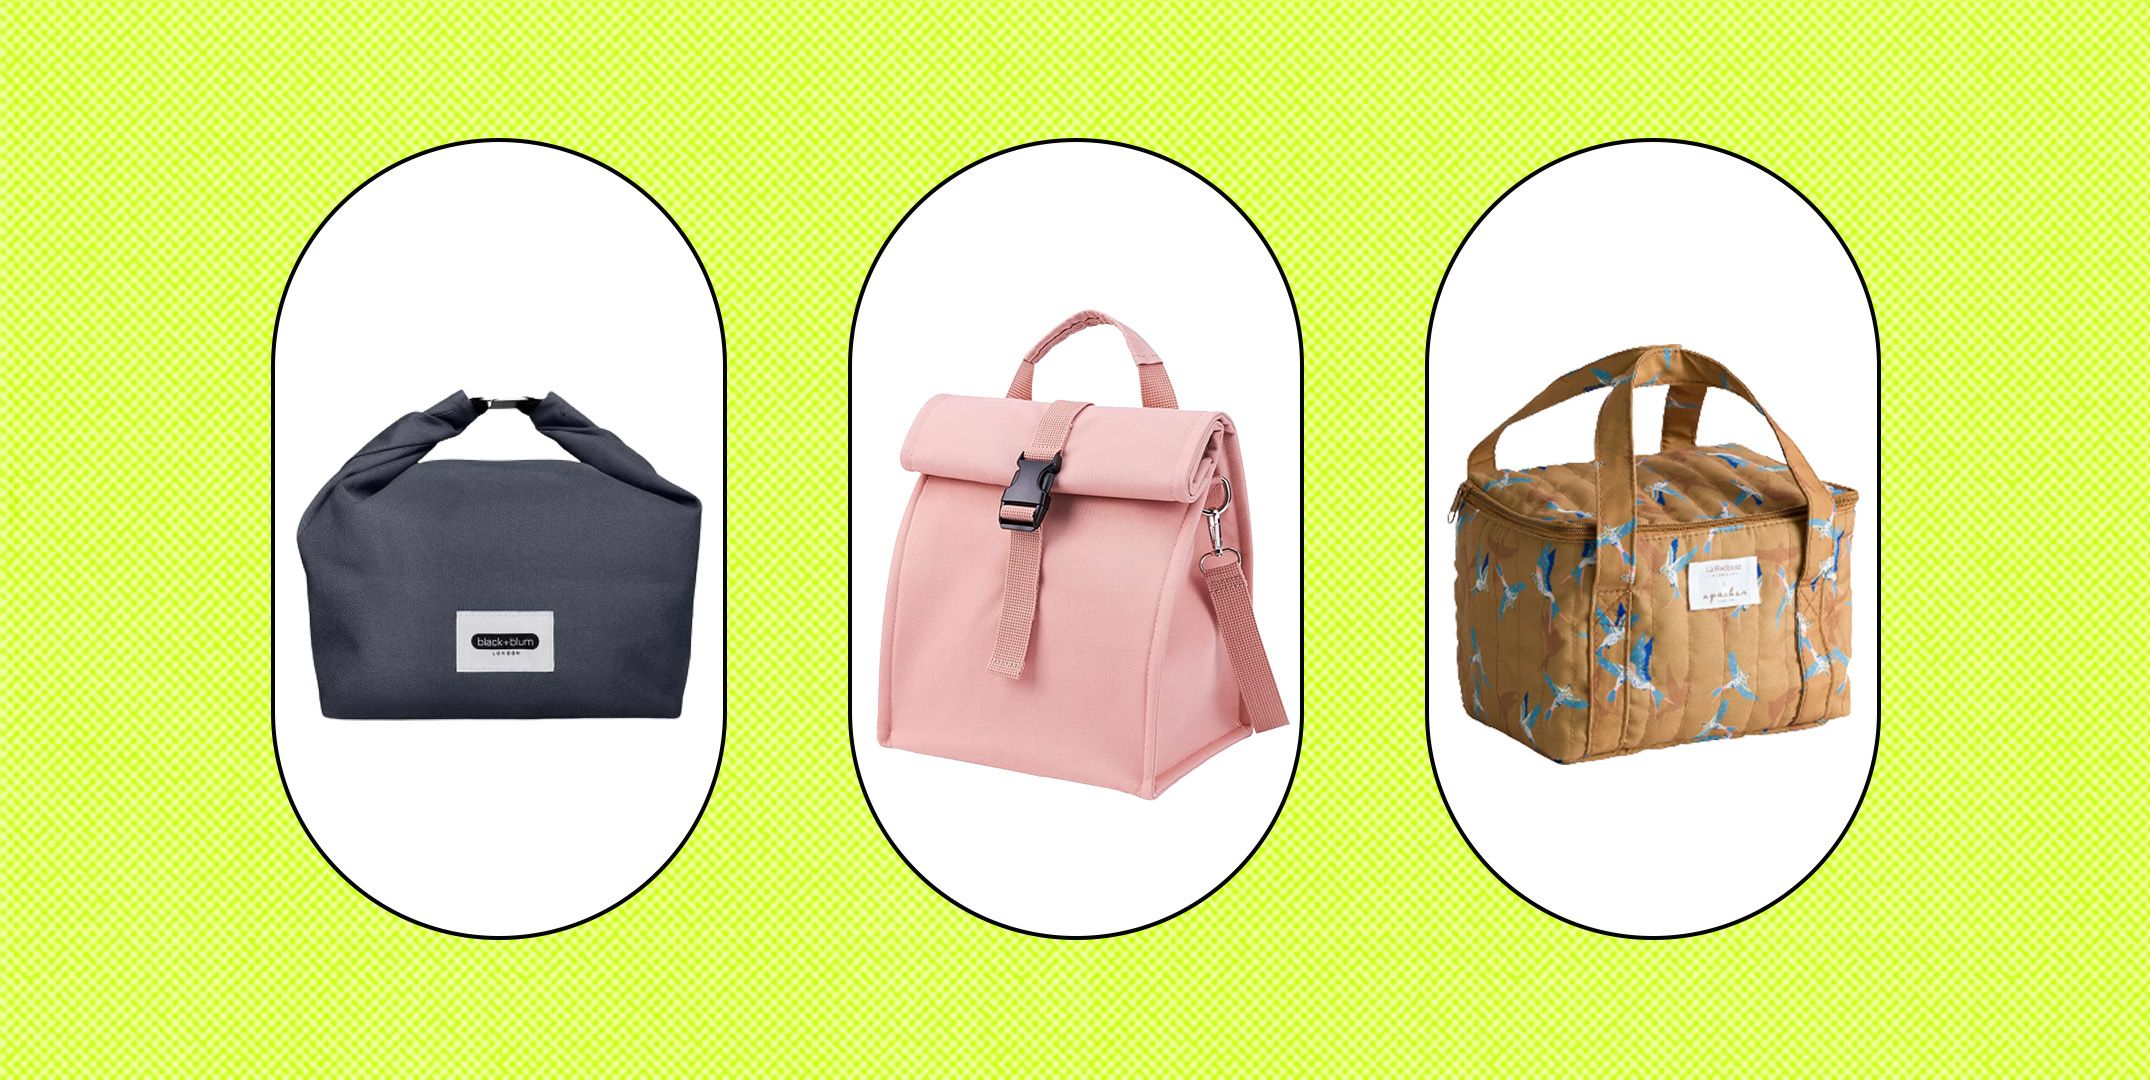 Adult Lunch Boxes & Cute Totes For Packed Work Lunches